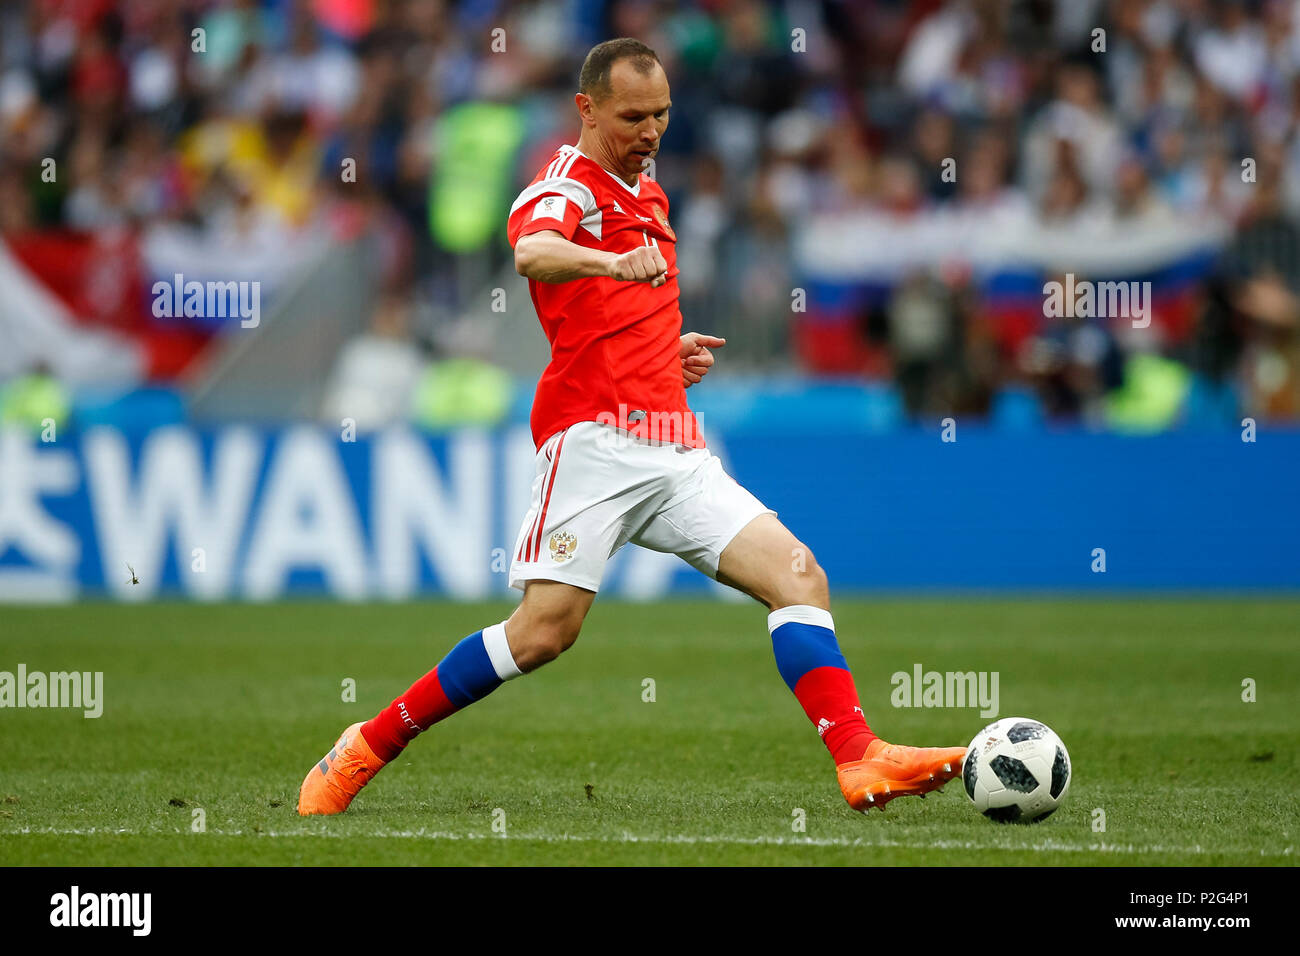 Moscow, Russia. 14th June 2018. Vladimir Granat of Russia during the 2018 FIFA World Cup Group A match between Russia and Saudi Arabia at Luzhniki Stadium on June 14th 2018 in Moscow, Russia. Credit: PHC Images/Alamy Live News Stock Photo